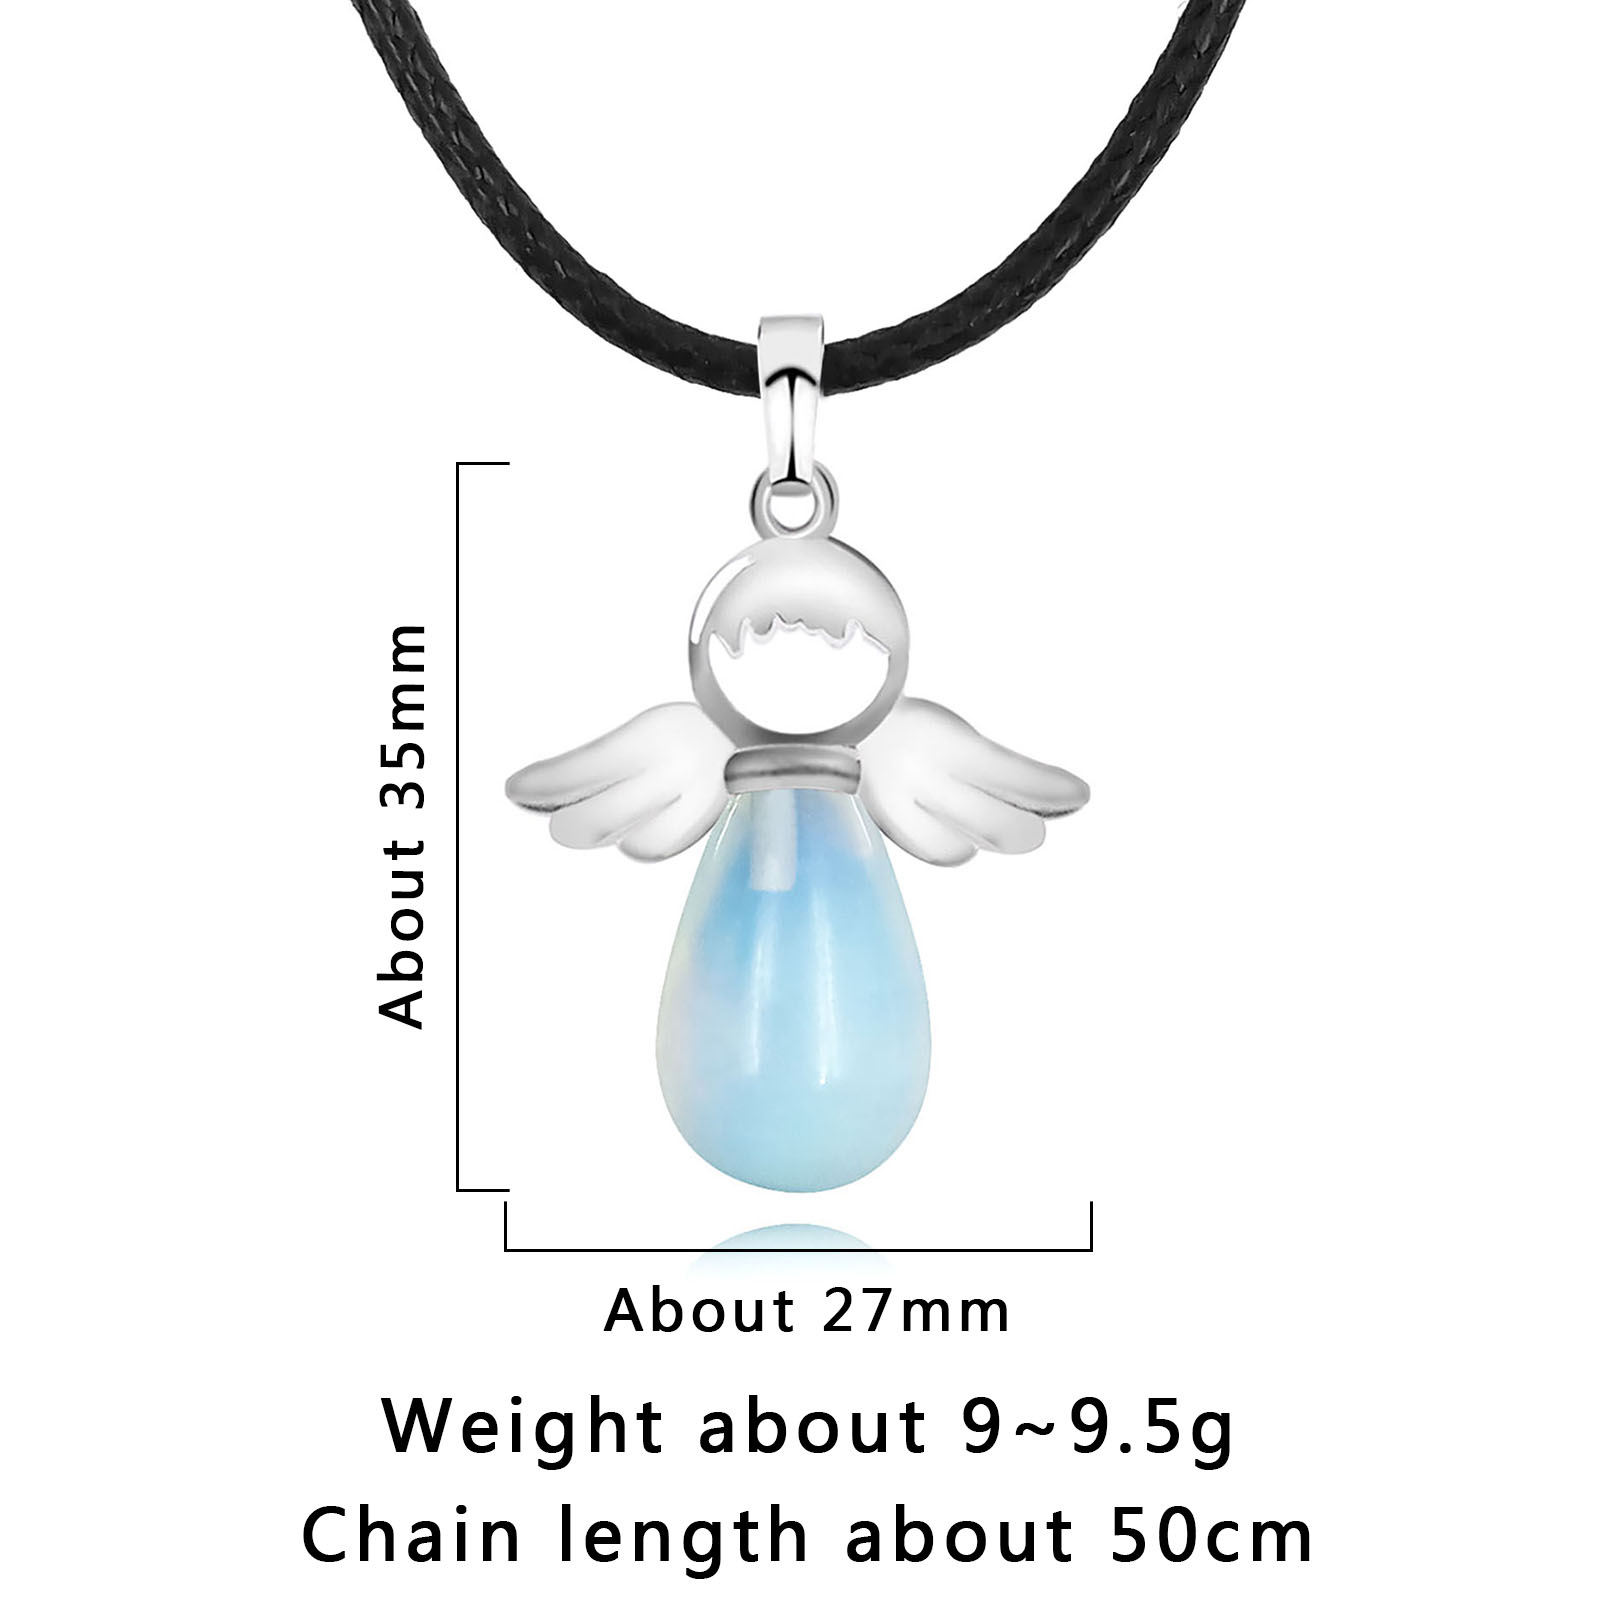 Pendant length is about 27mm, height is about 35mm, chain length is about 50cm